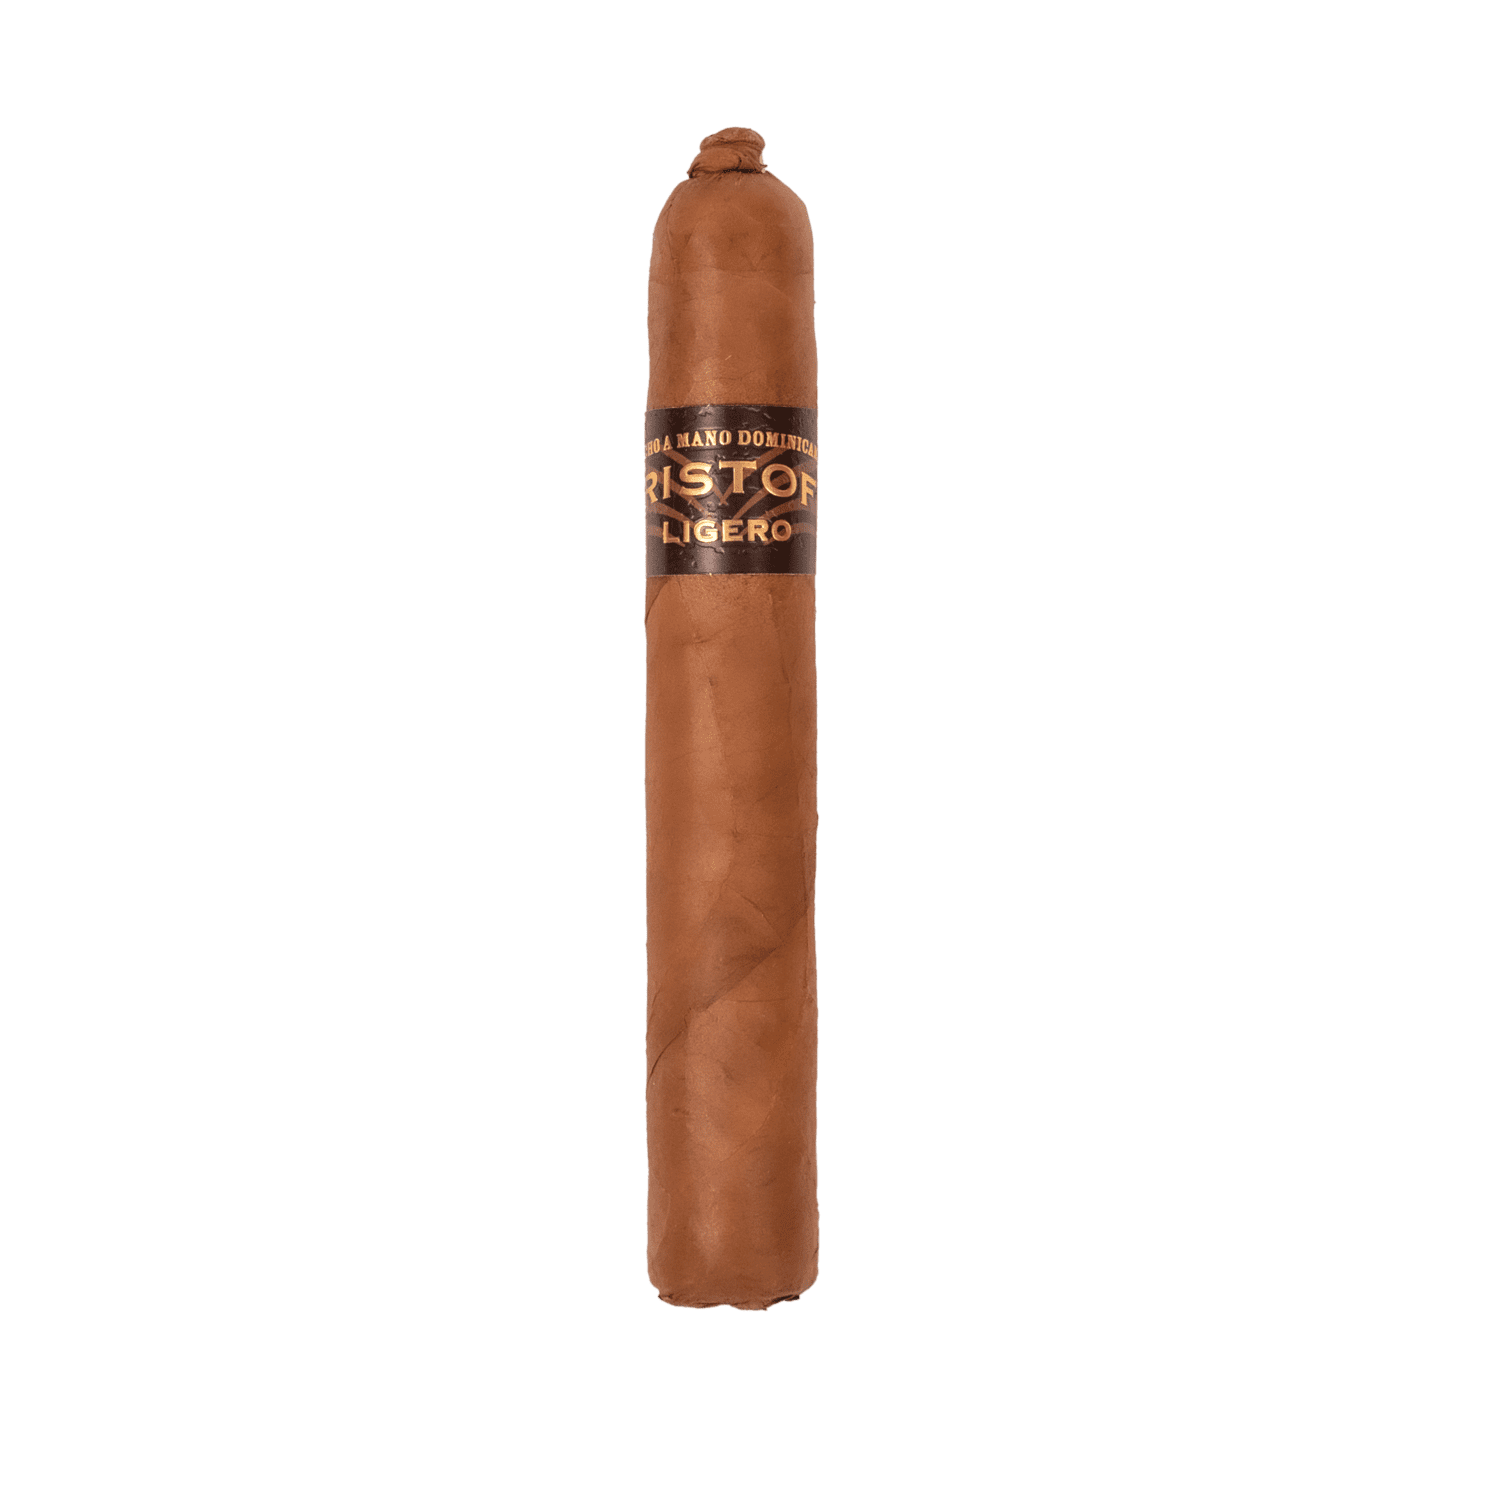 Kristoff Cigars: Ligero Criollo Highly Rated Cigar